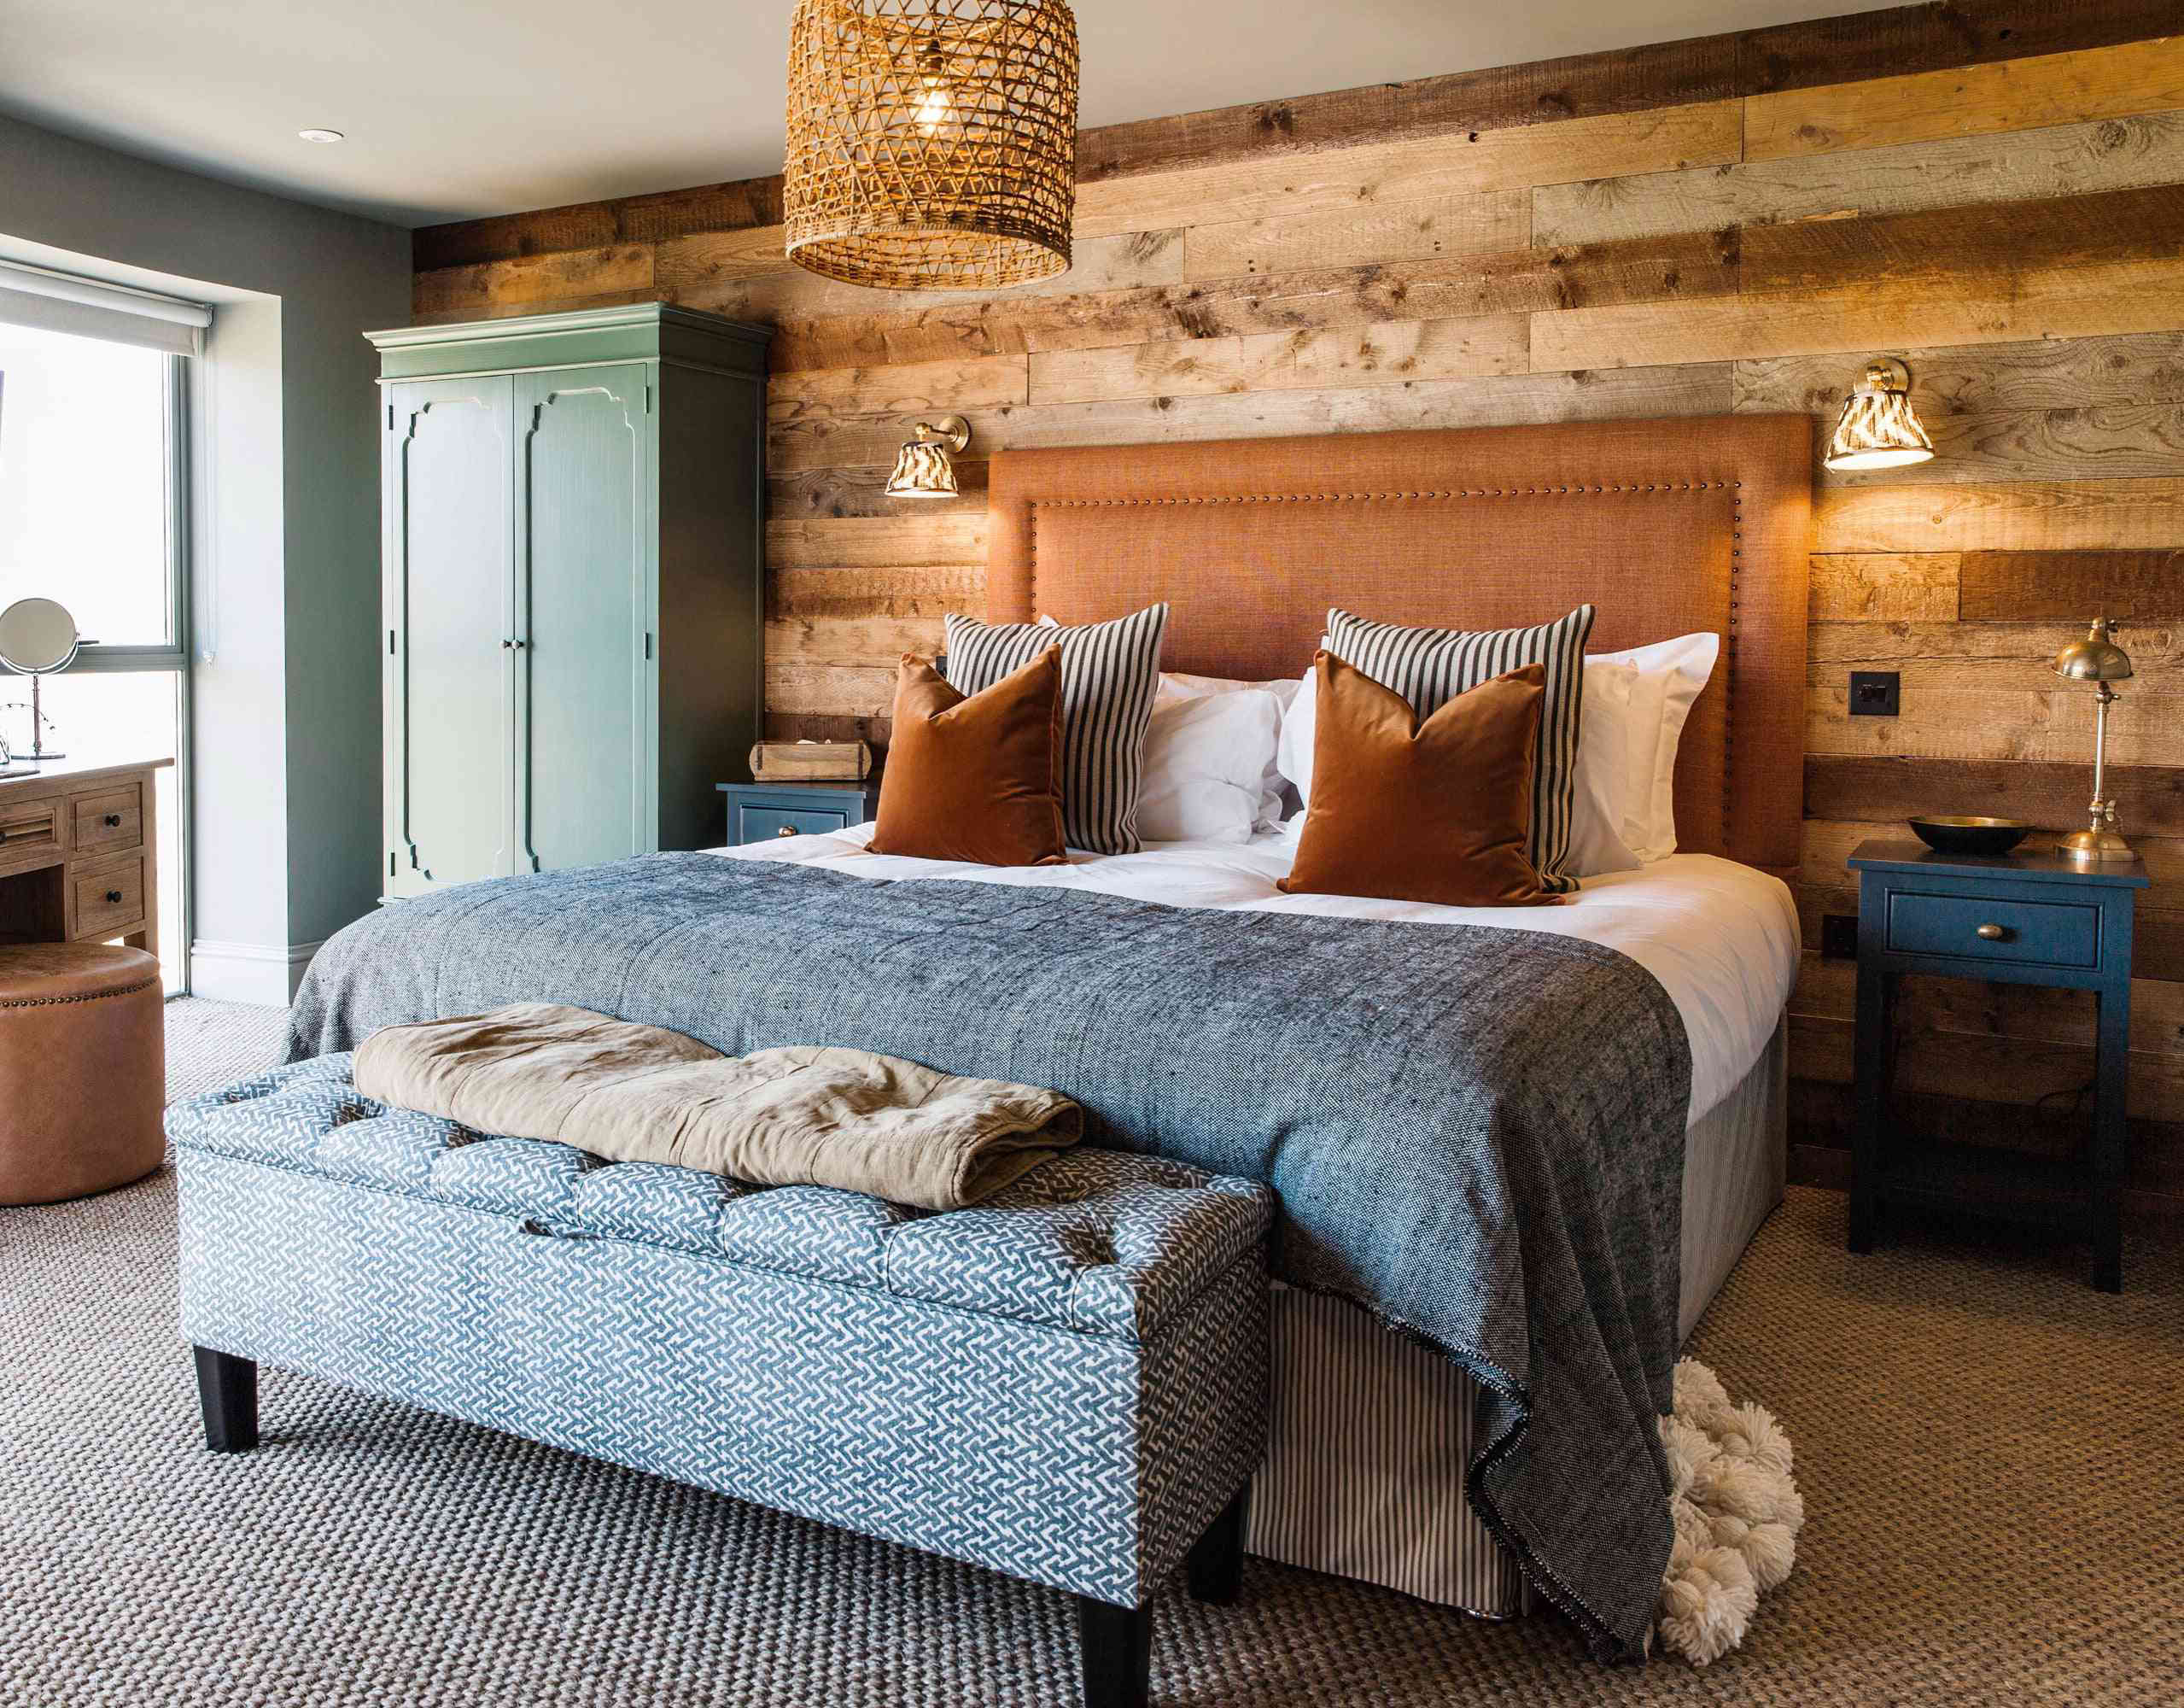 22 Rustic Bedroom Ideas for a Cozy Oasis